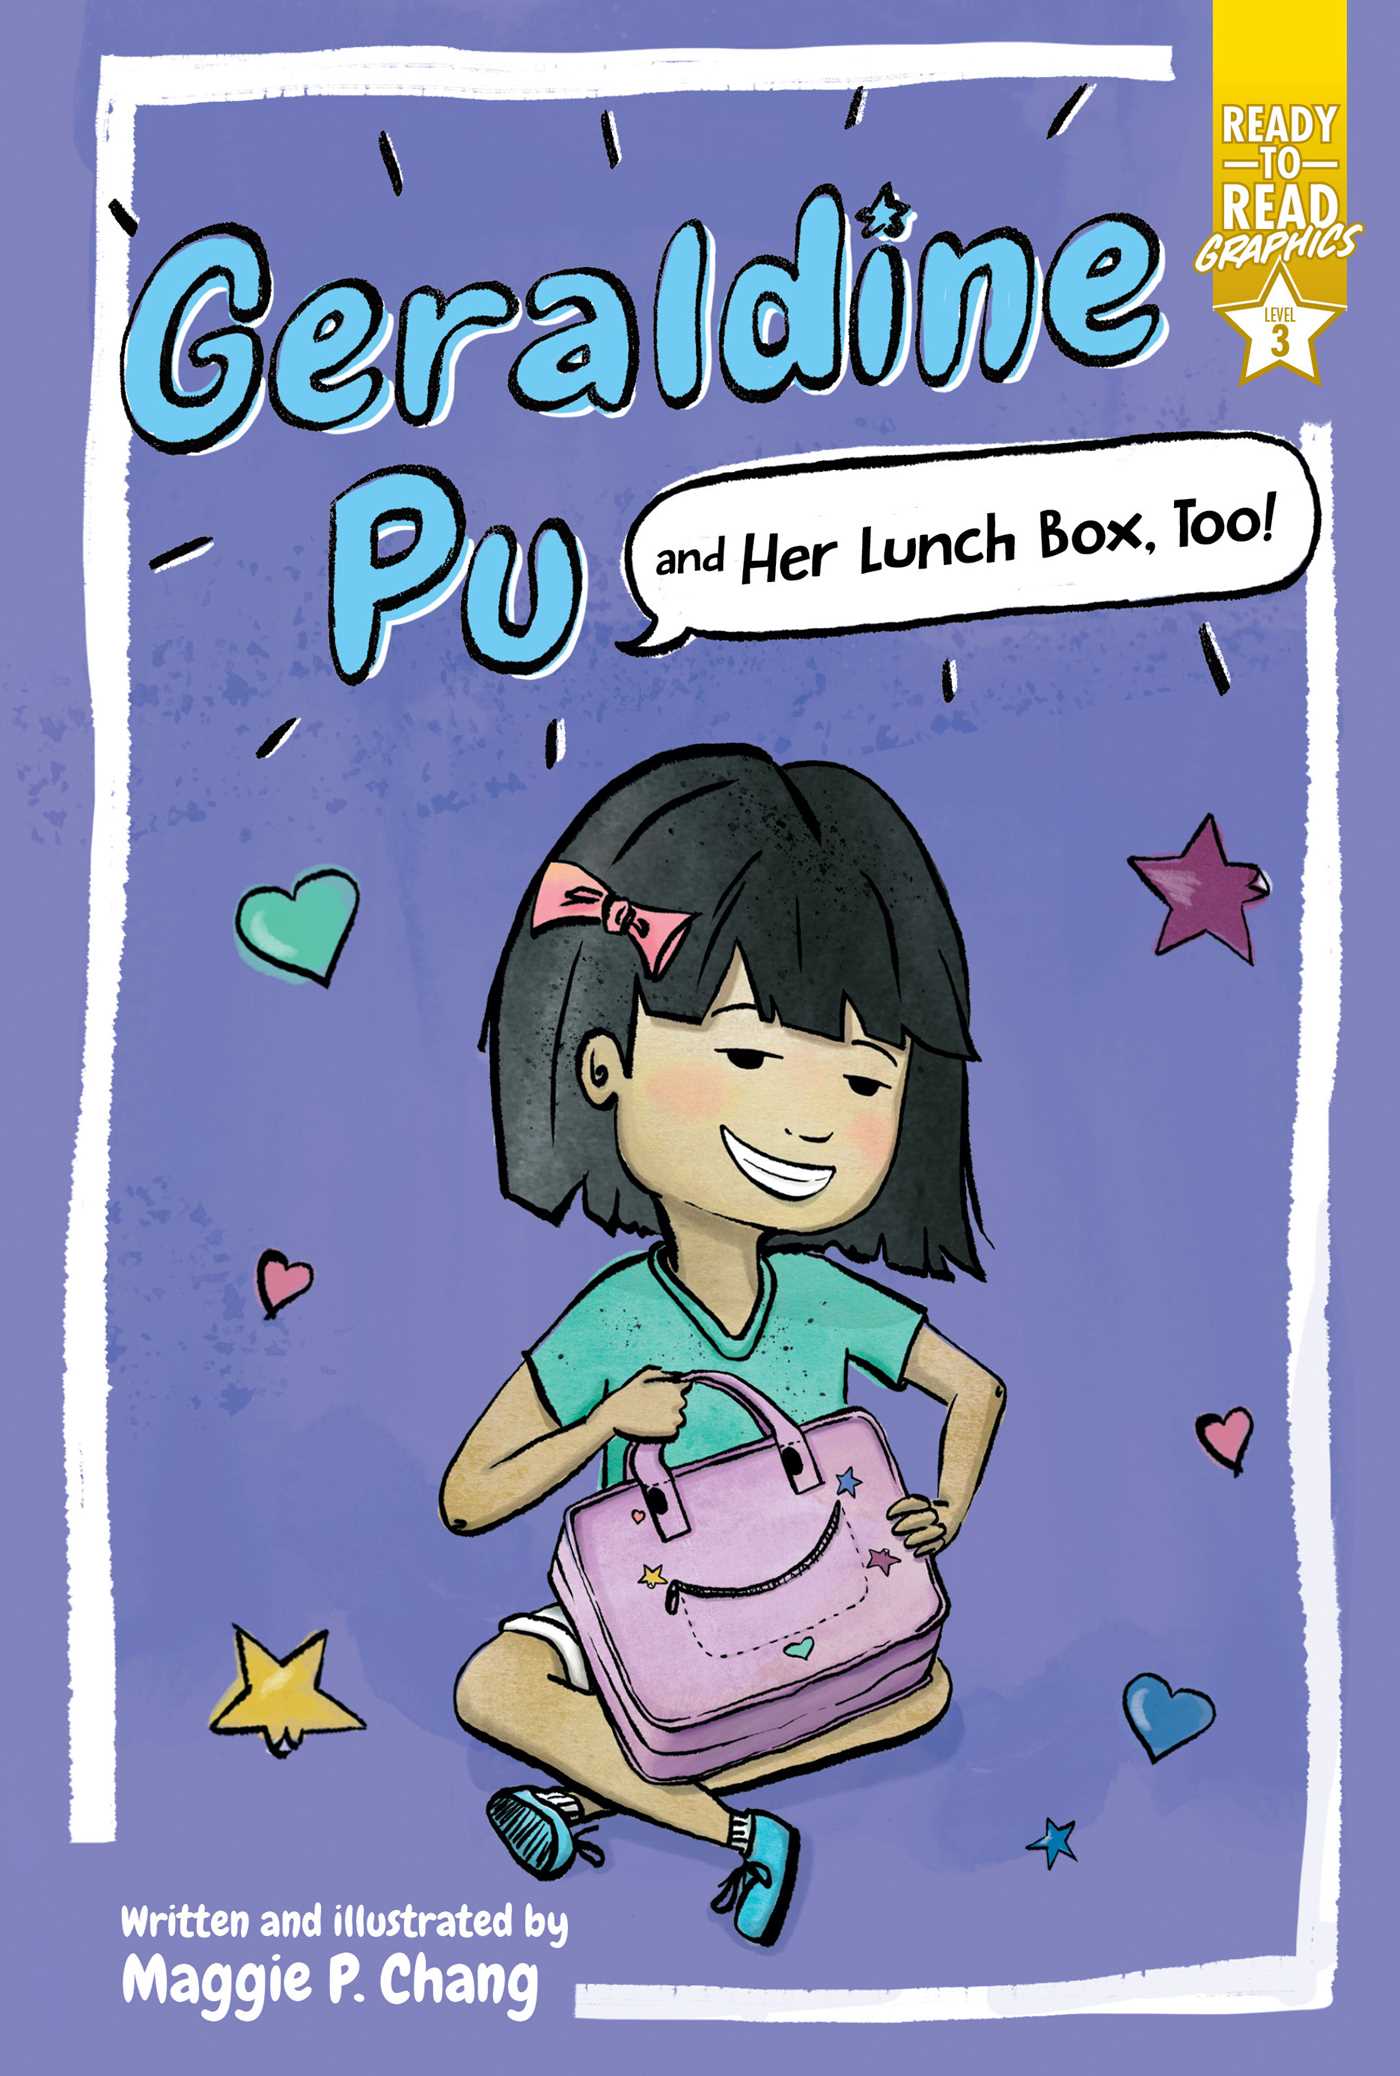 Ready-to-Read Graphics - Geraldine Pu and Her Lunch Box, Too!  | Chang, Maggie P.